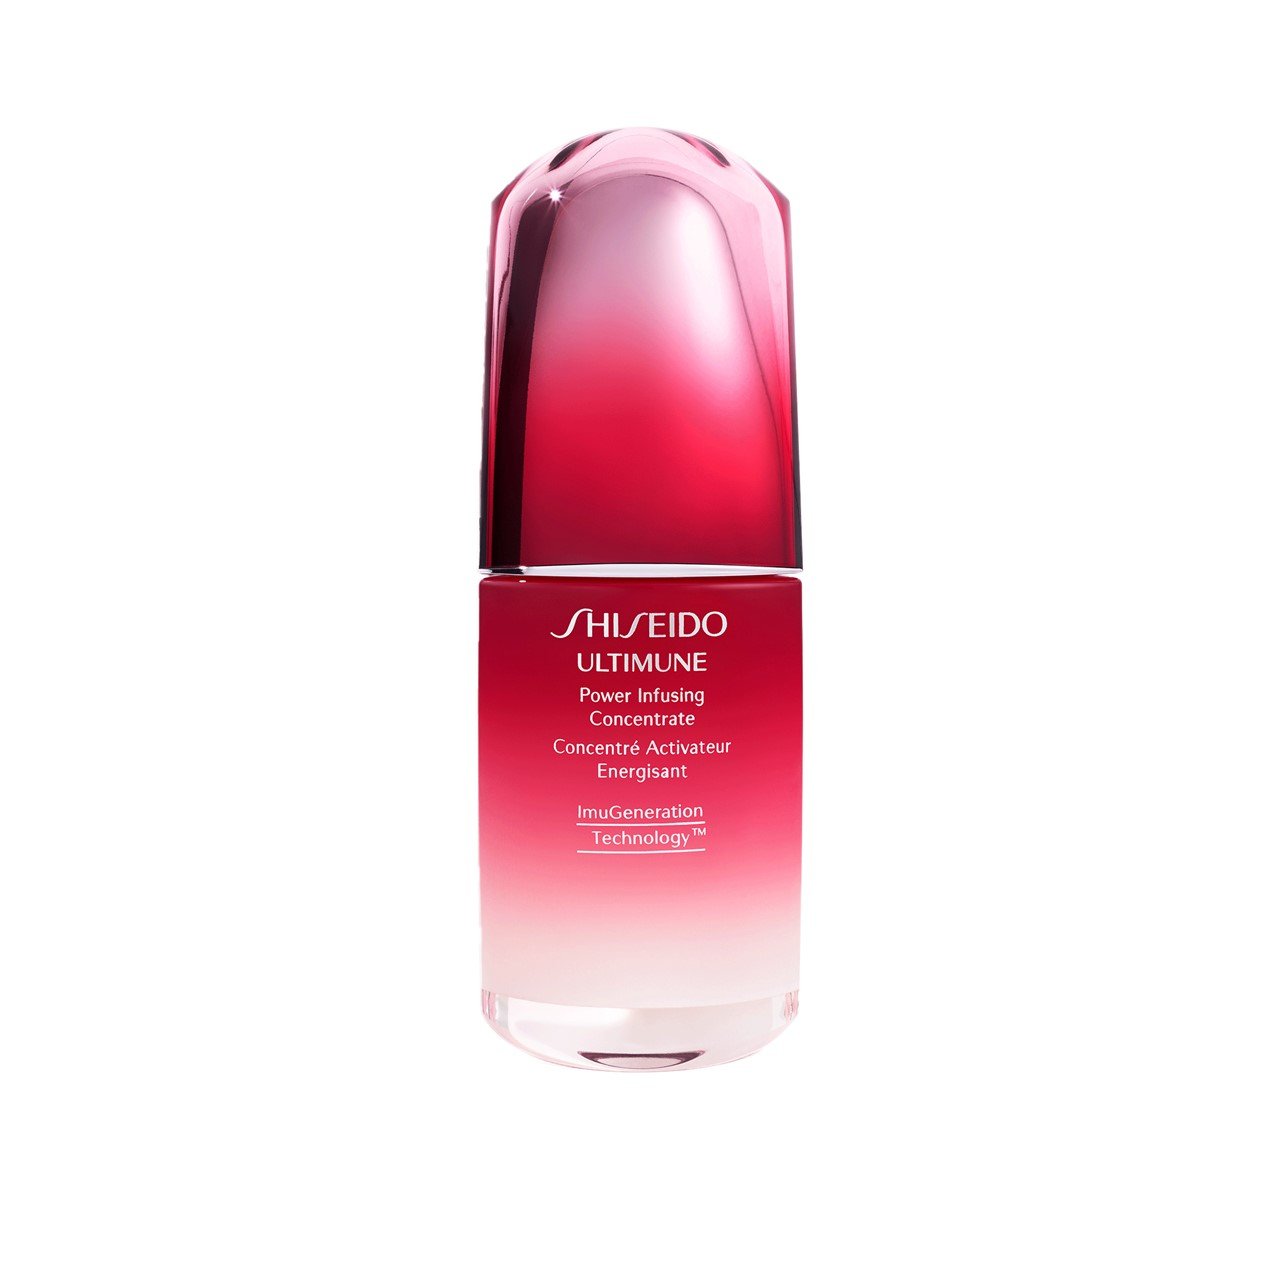 Shiseido concentrate. Ultimune концентрат шисейдо. Ultimune концентрат шисейдо Power infusing. Shiseido Ultimune Power infusing Concentrate 50 ml. Shiseido Ultimate Power infusing Concentrate.